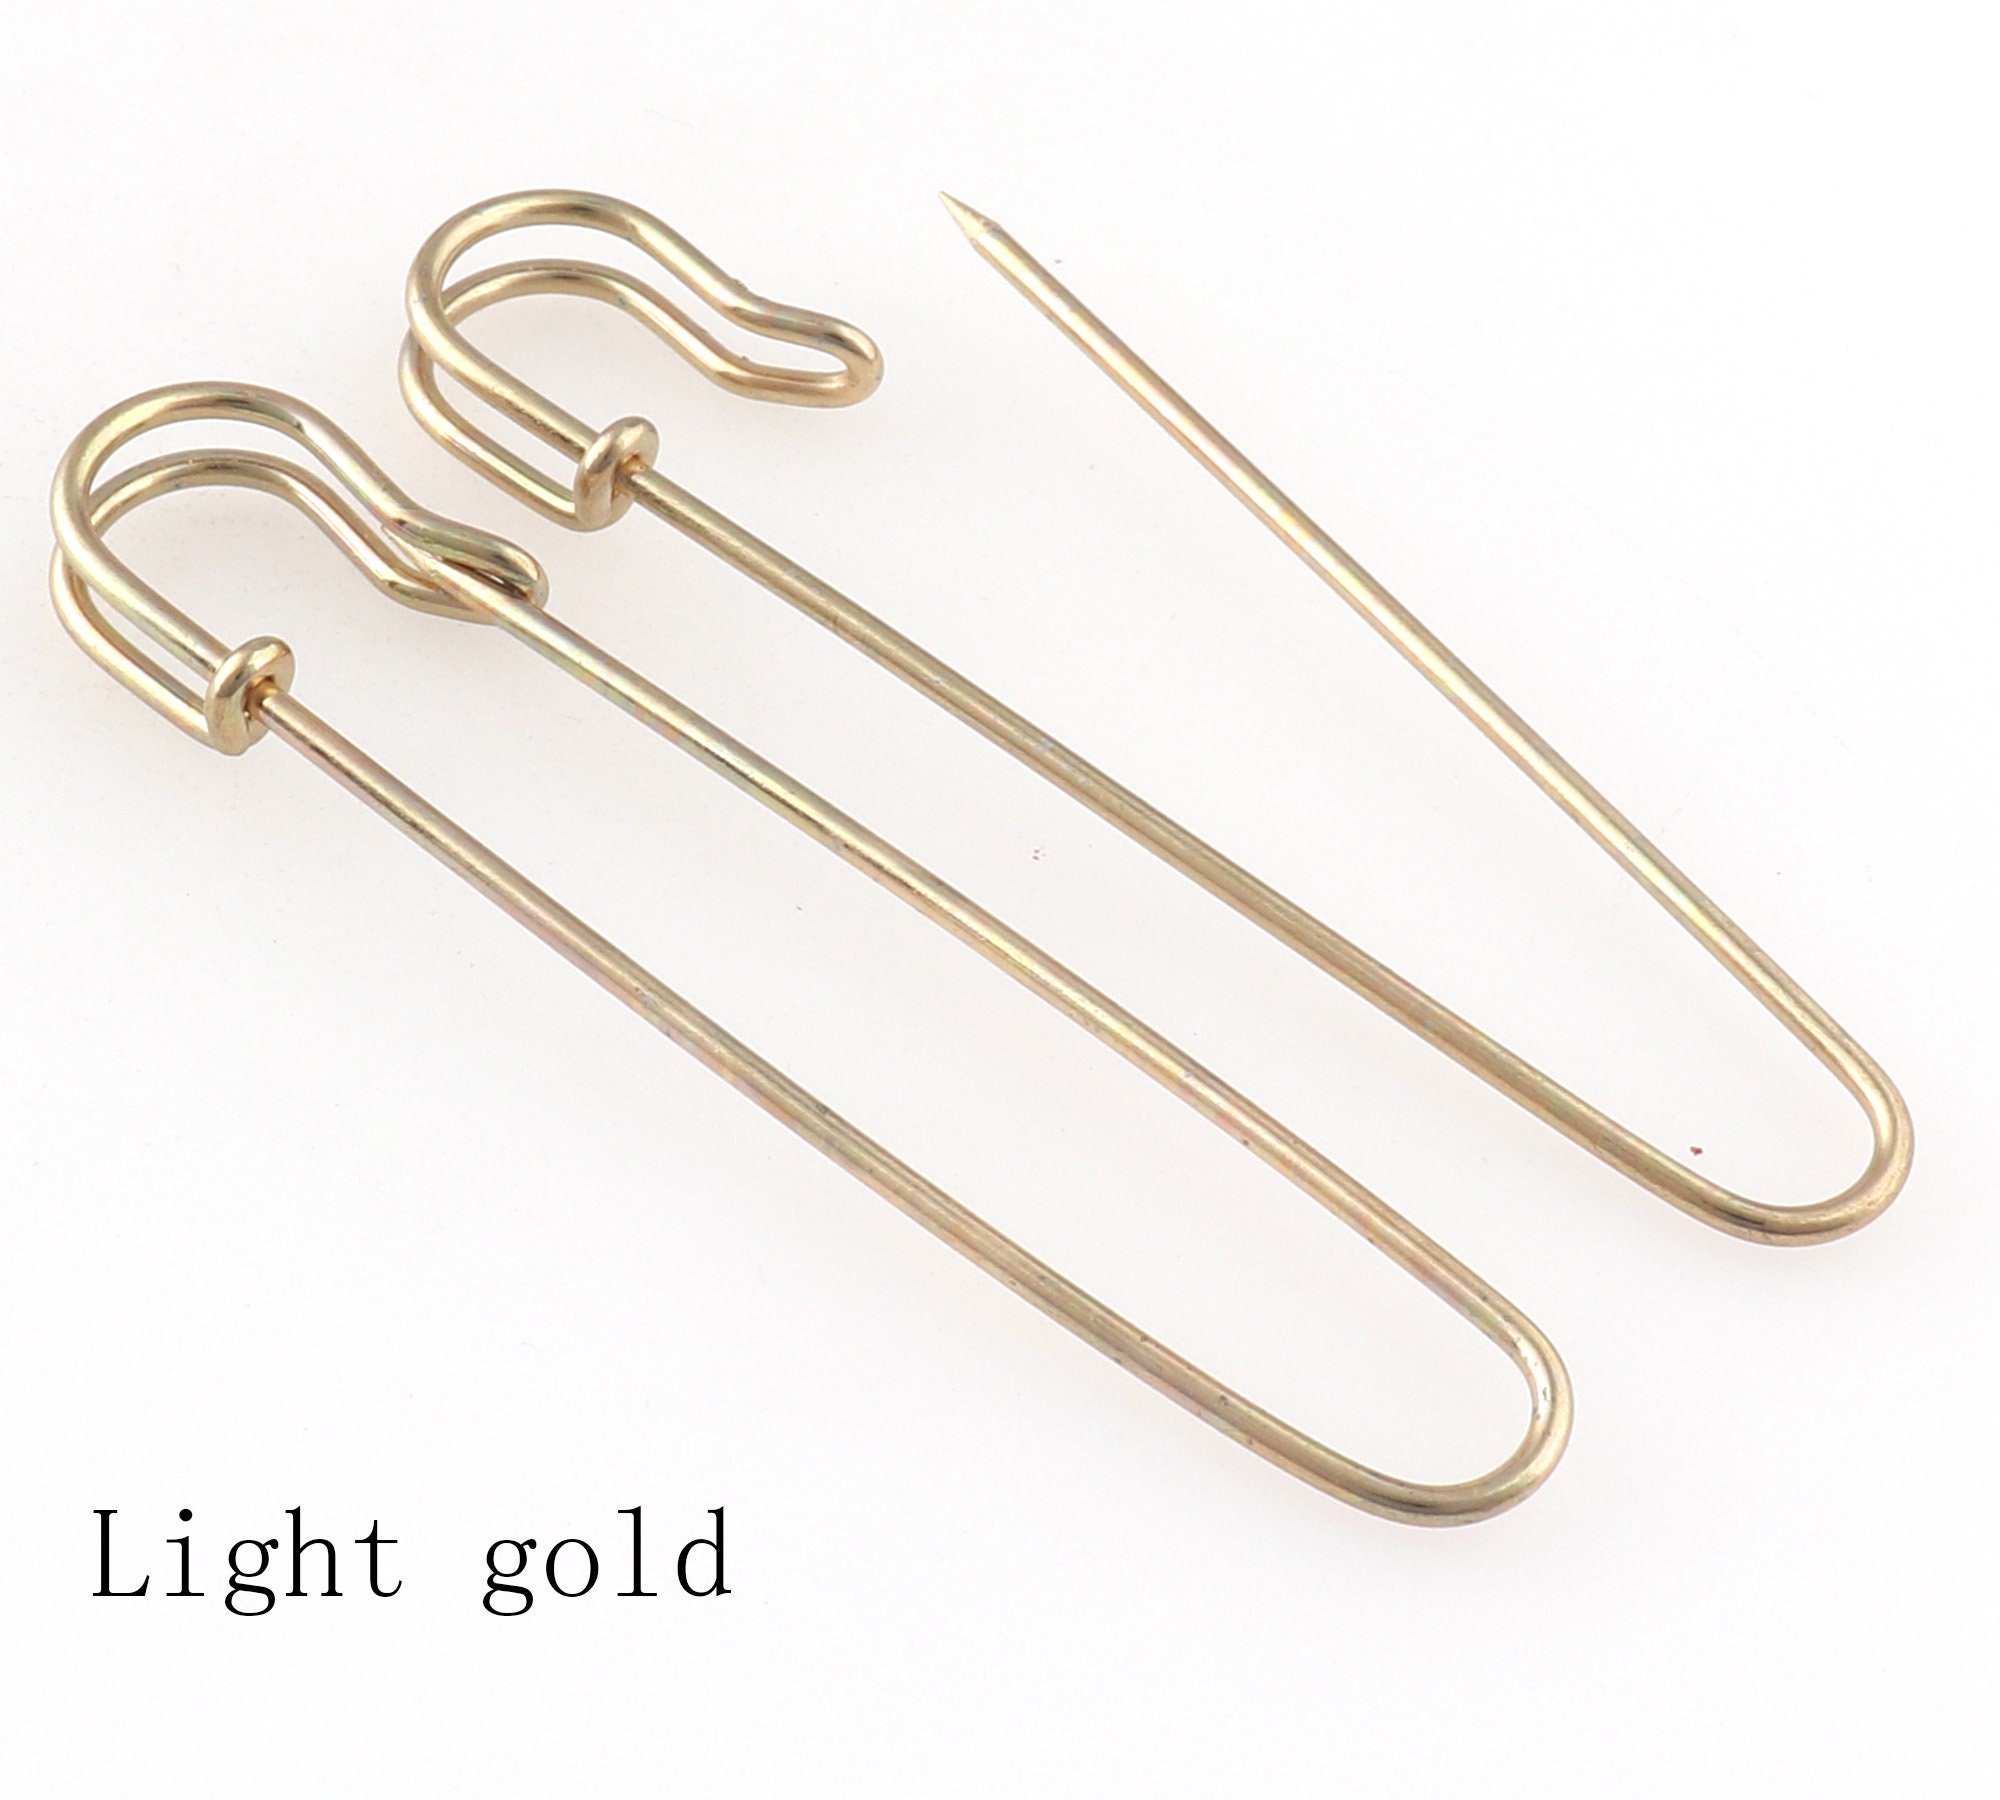 Silver Safety pins Coiless Safety Pins Larger Safety Pins Kilt Pins Broochs  letter Bar Pins Apparel Accessories DIY Sewing 4pcs